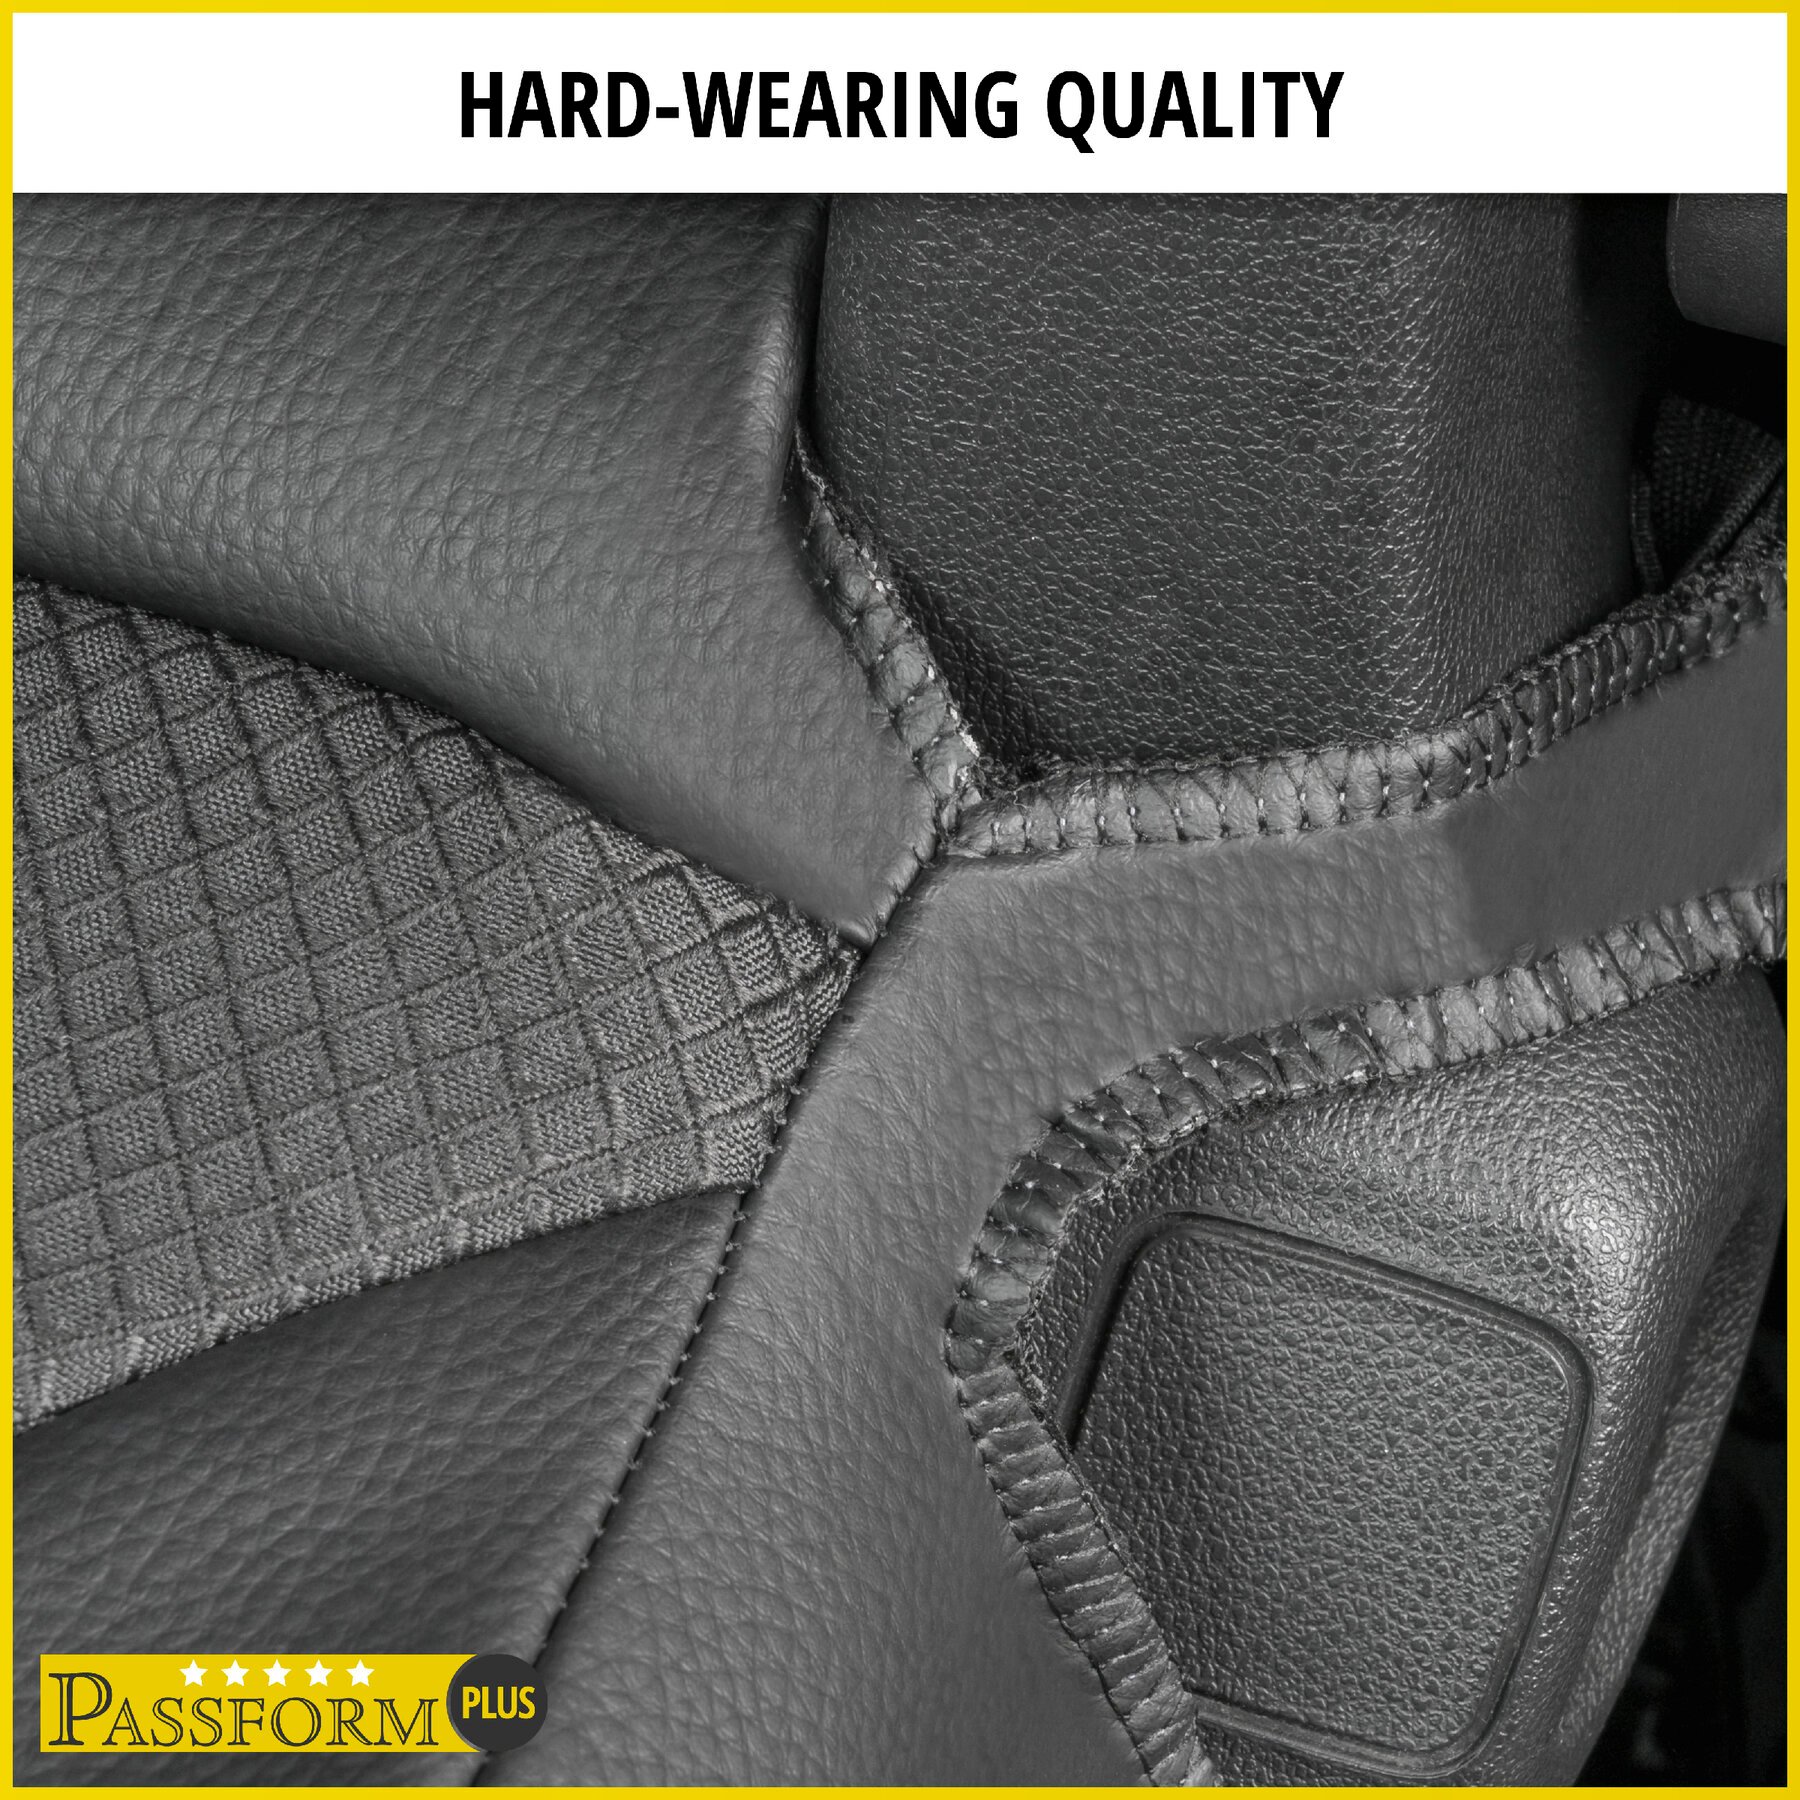 Premium Seat Cover for Citroen Berlingo 2 2009-Today, 1 single seat cover front, 1 double bench cover